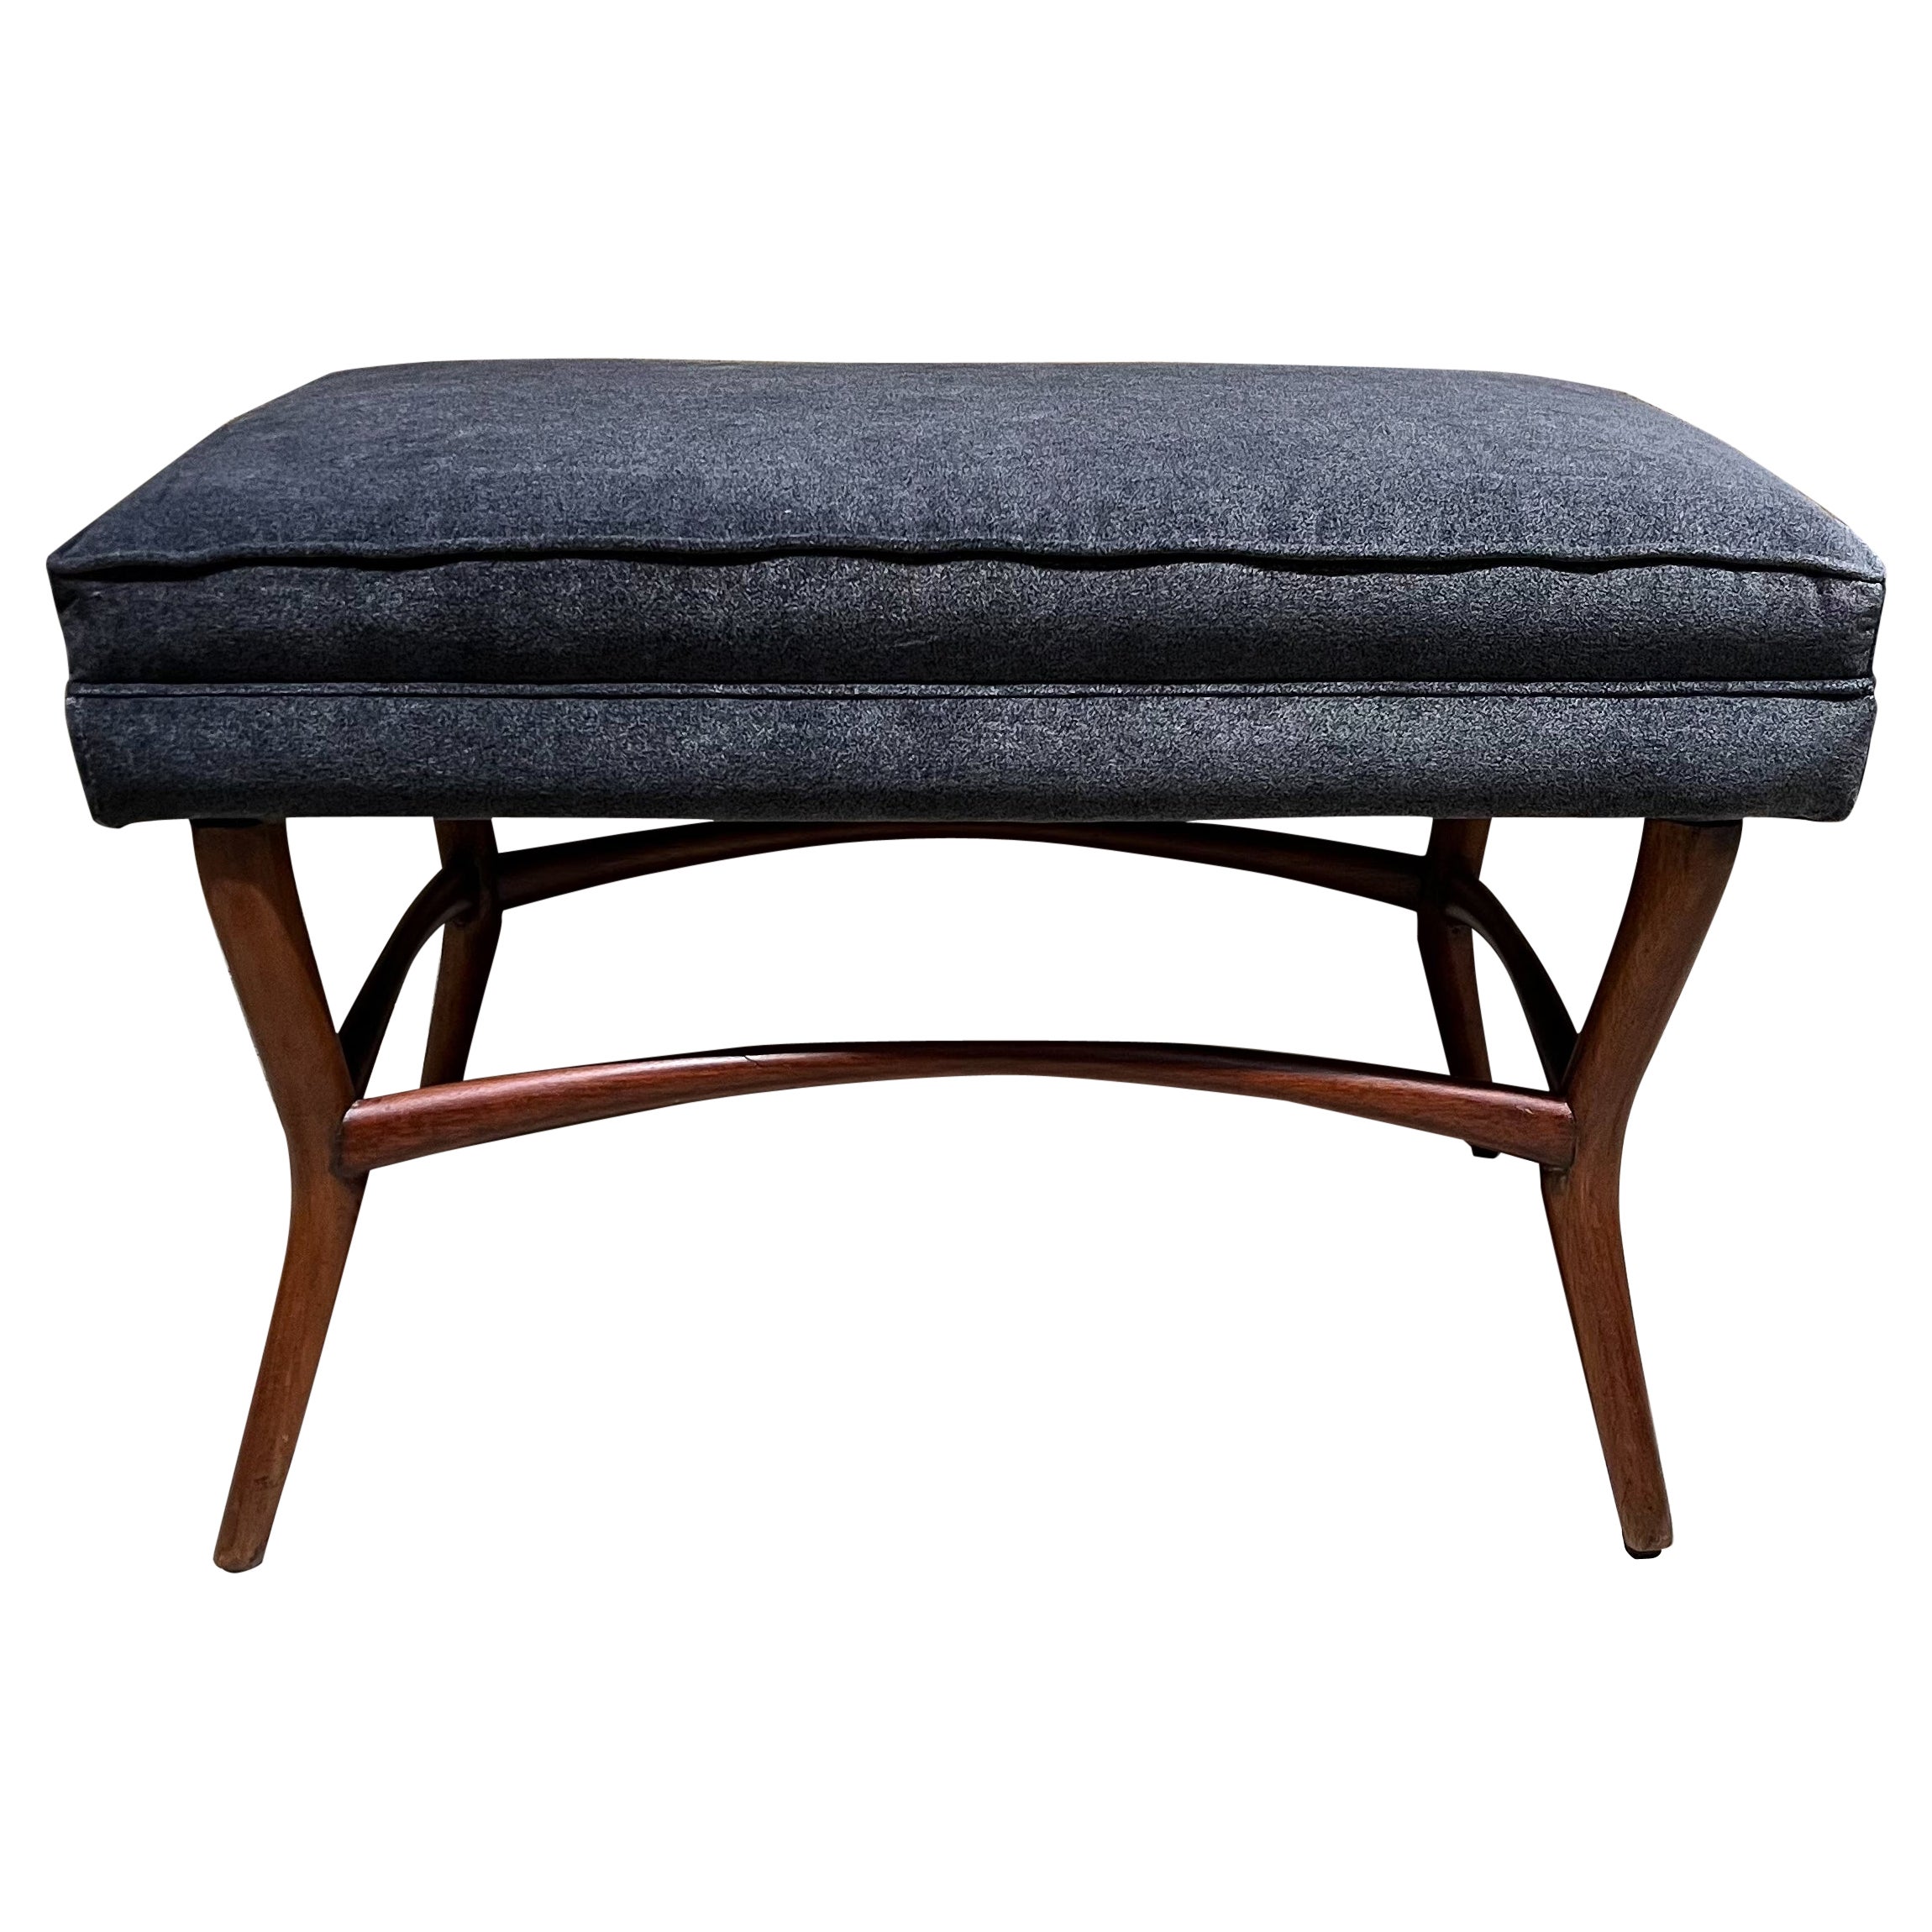 1950s Modernist Bench in Mahogany New Cushioned Gray Seat from Mexico For Sale